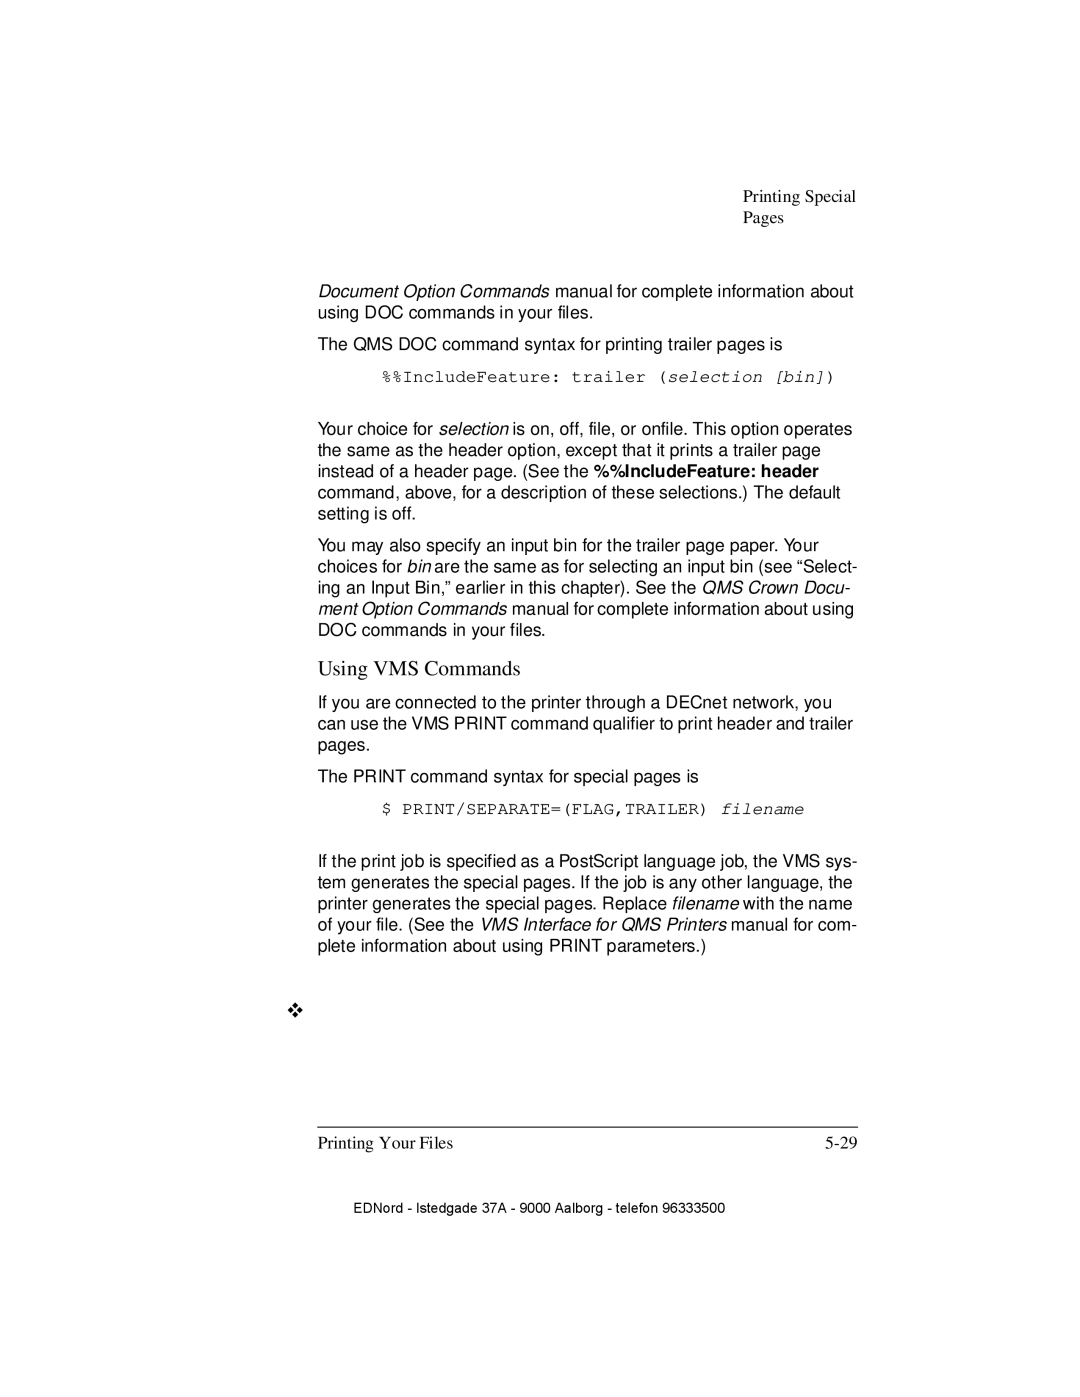 IBM QMS 4525 manual Using VMS Commands, The QMS DOC command syntax for printing trailer pages is 